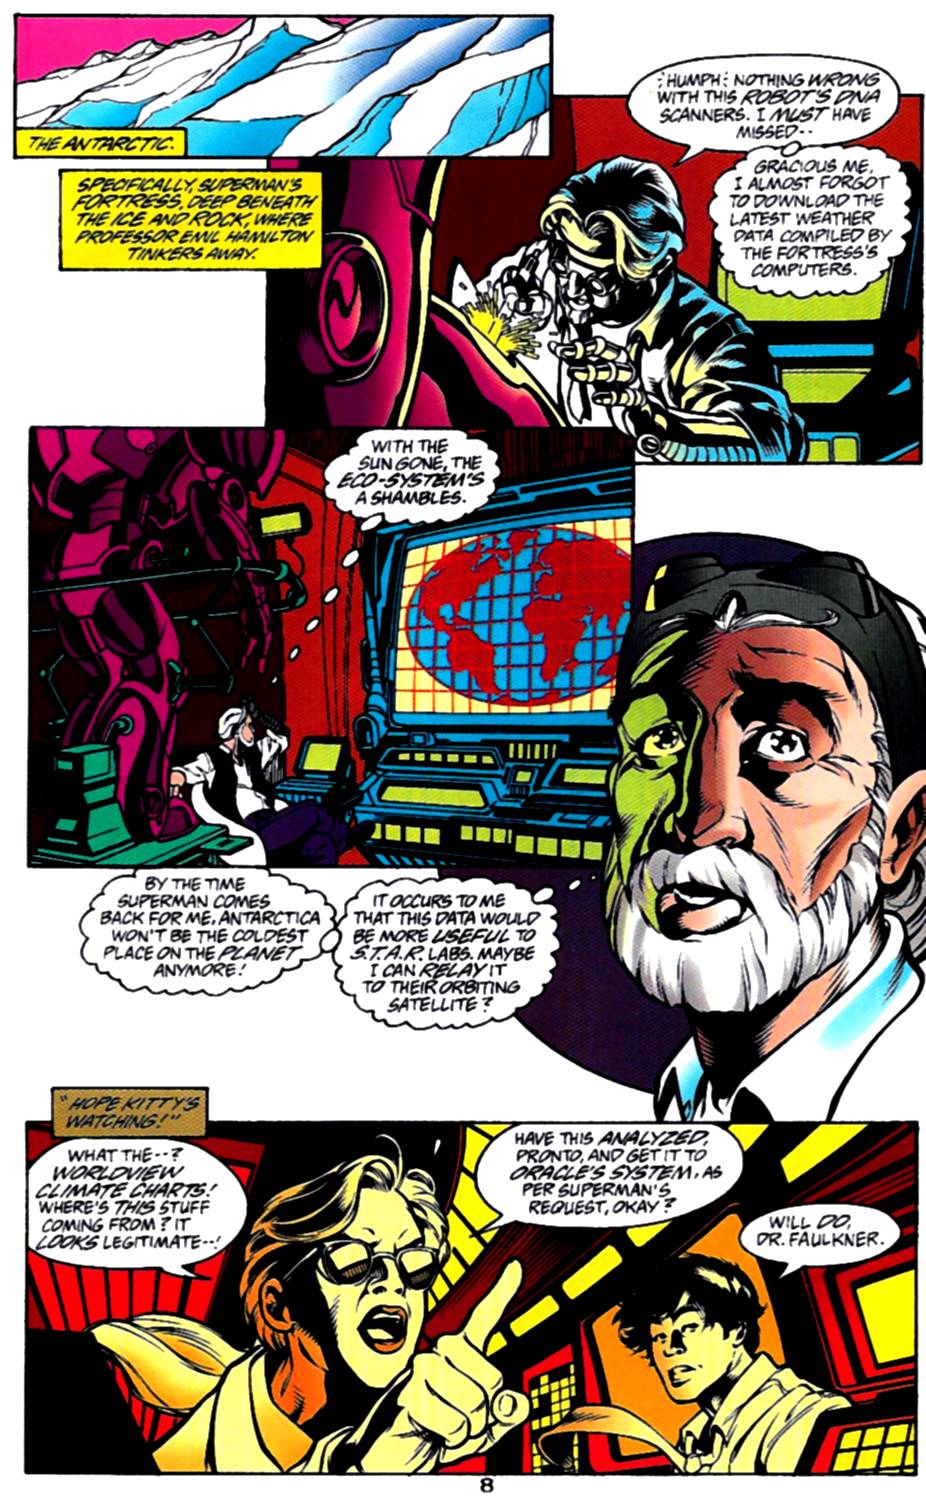 Adventures of Superman (1987) 540 Page 8